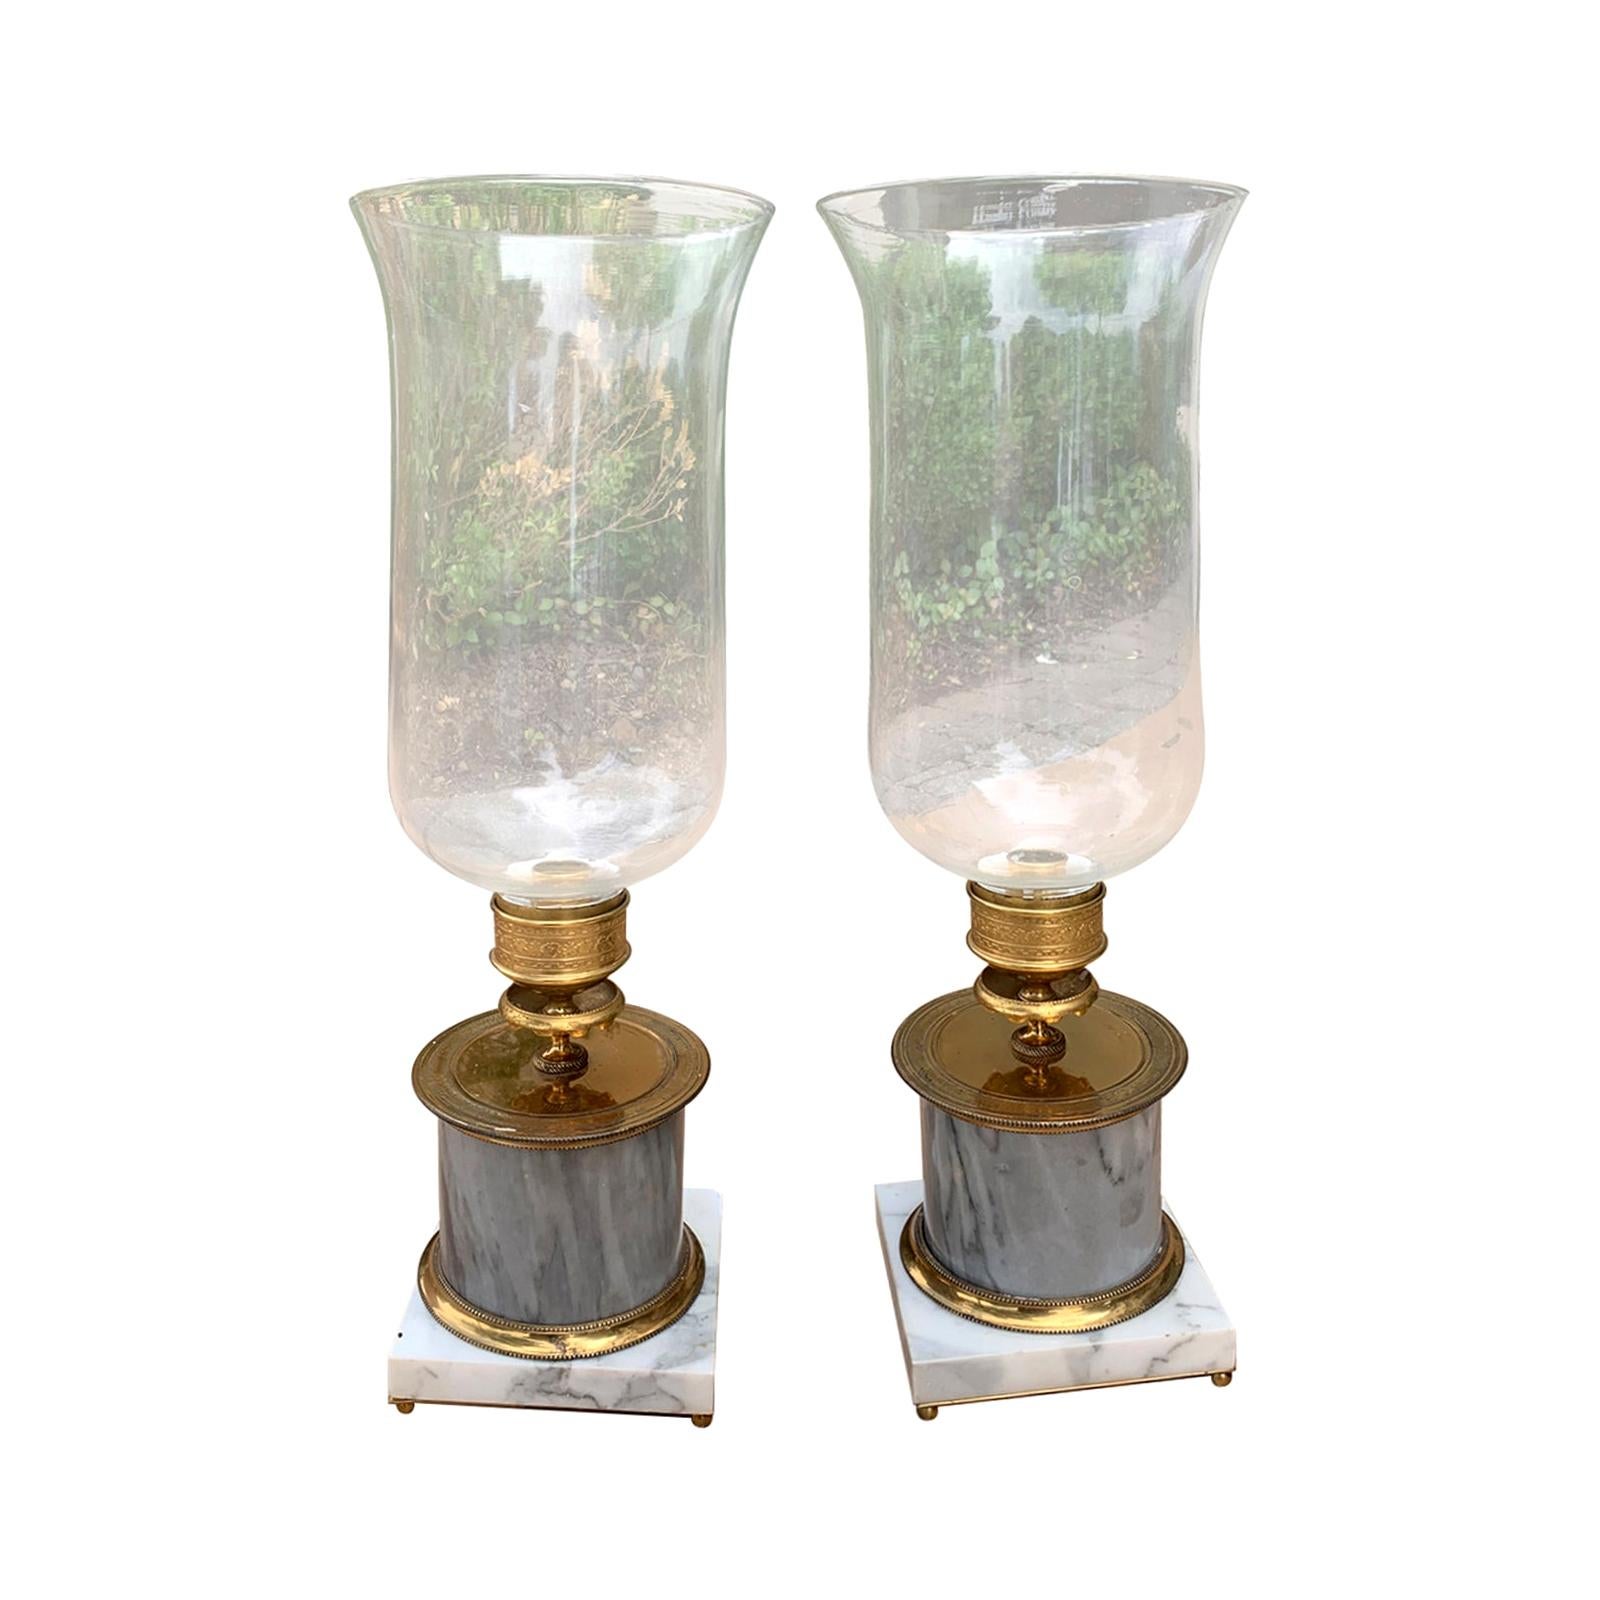 Pair of White & Grey Marble Candlesticks with Glass Photophores, circa 1950s